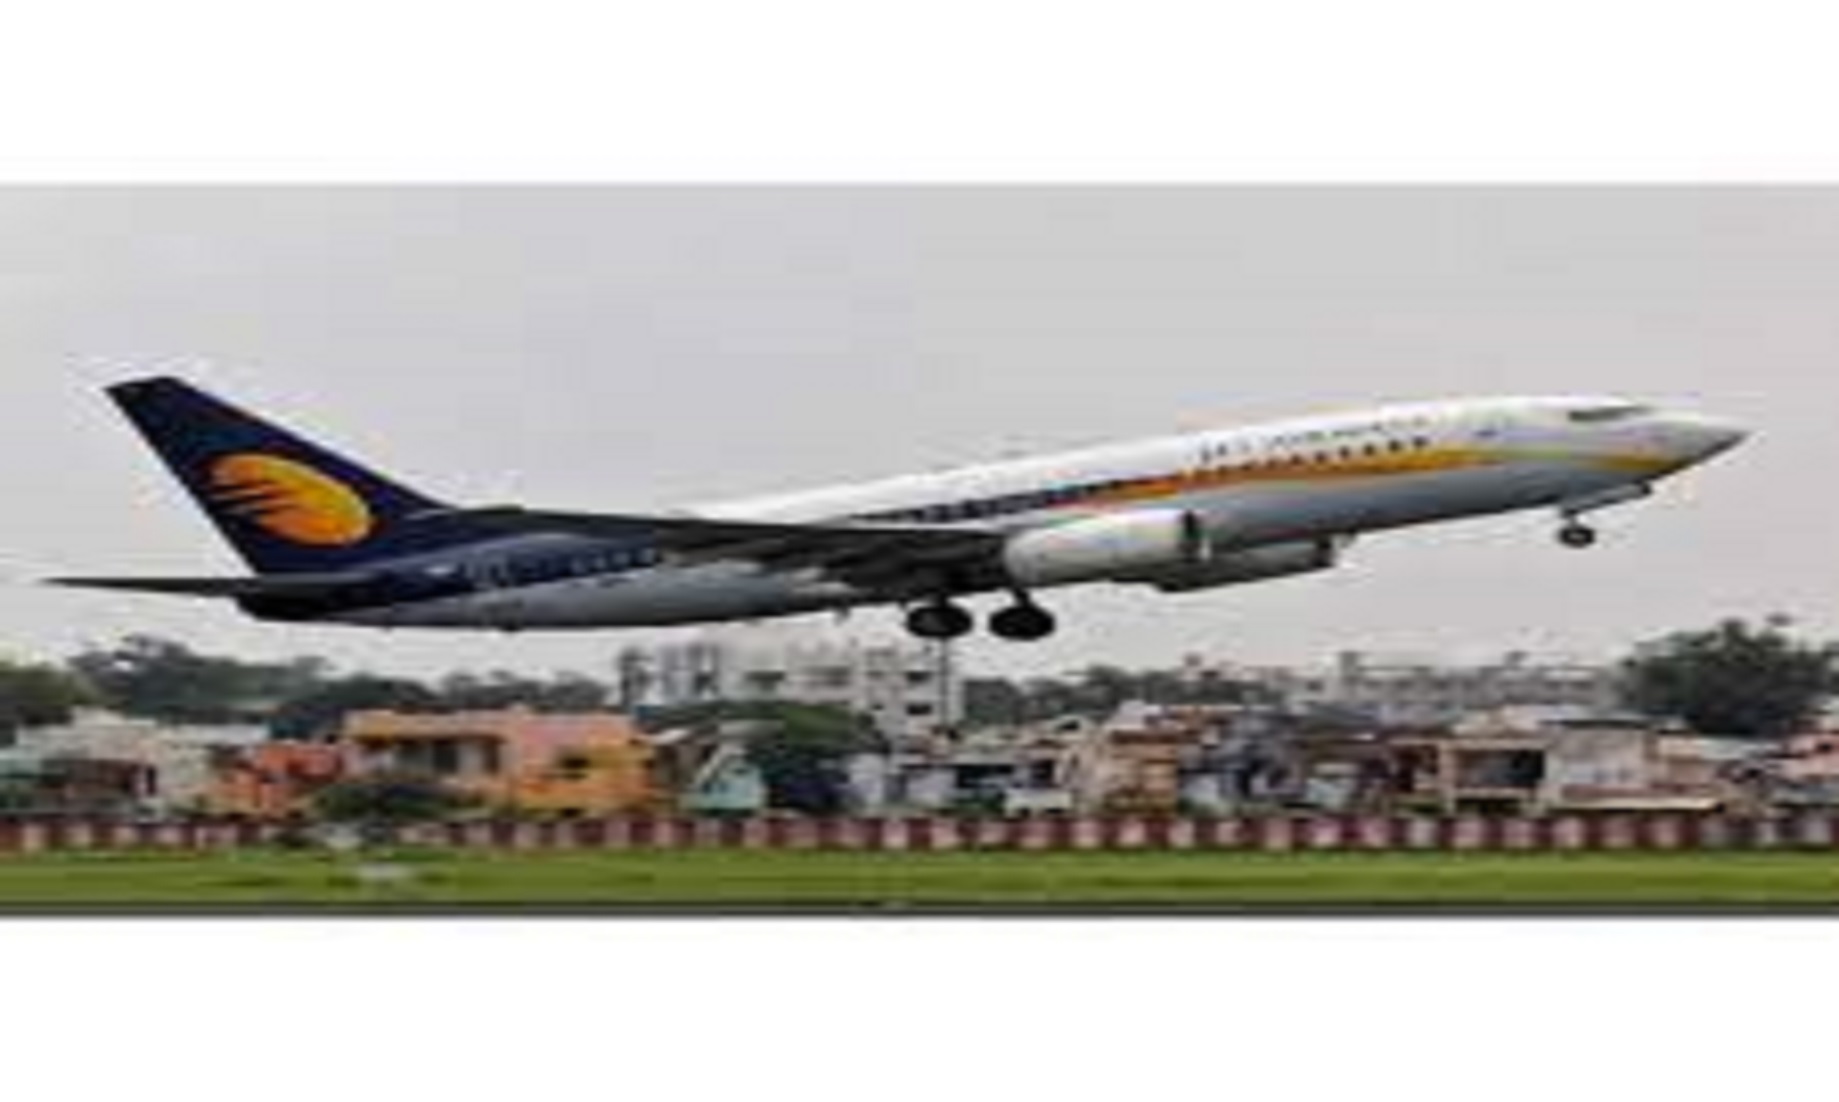 India’s Revived Domestic Airline Jet Airways Gets Regulatory Nod To Resume Operations